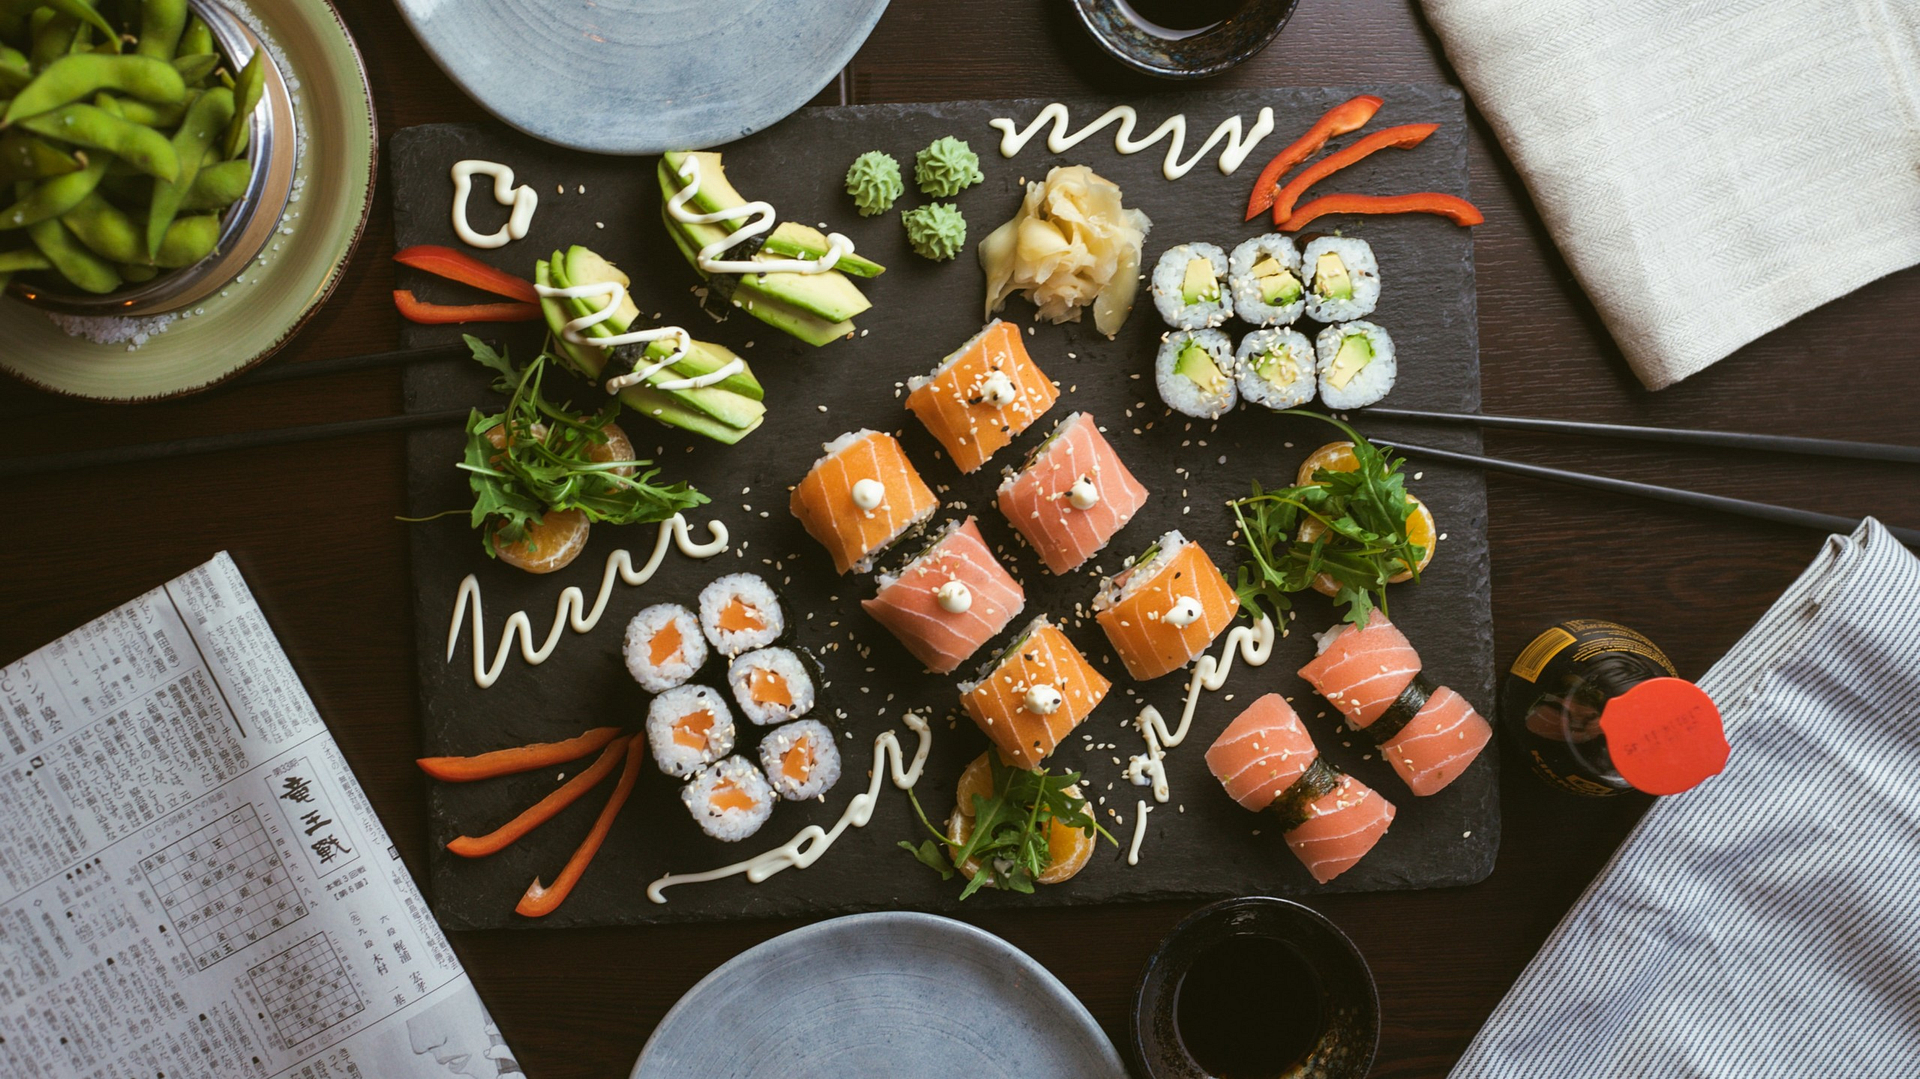 Japanese Food: What Can I Eat on My Diet?